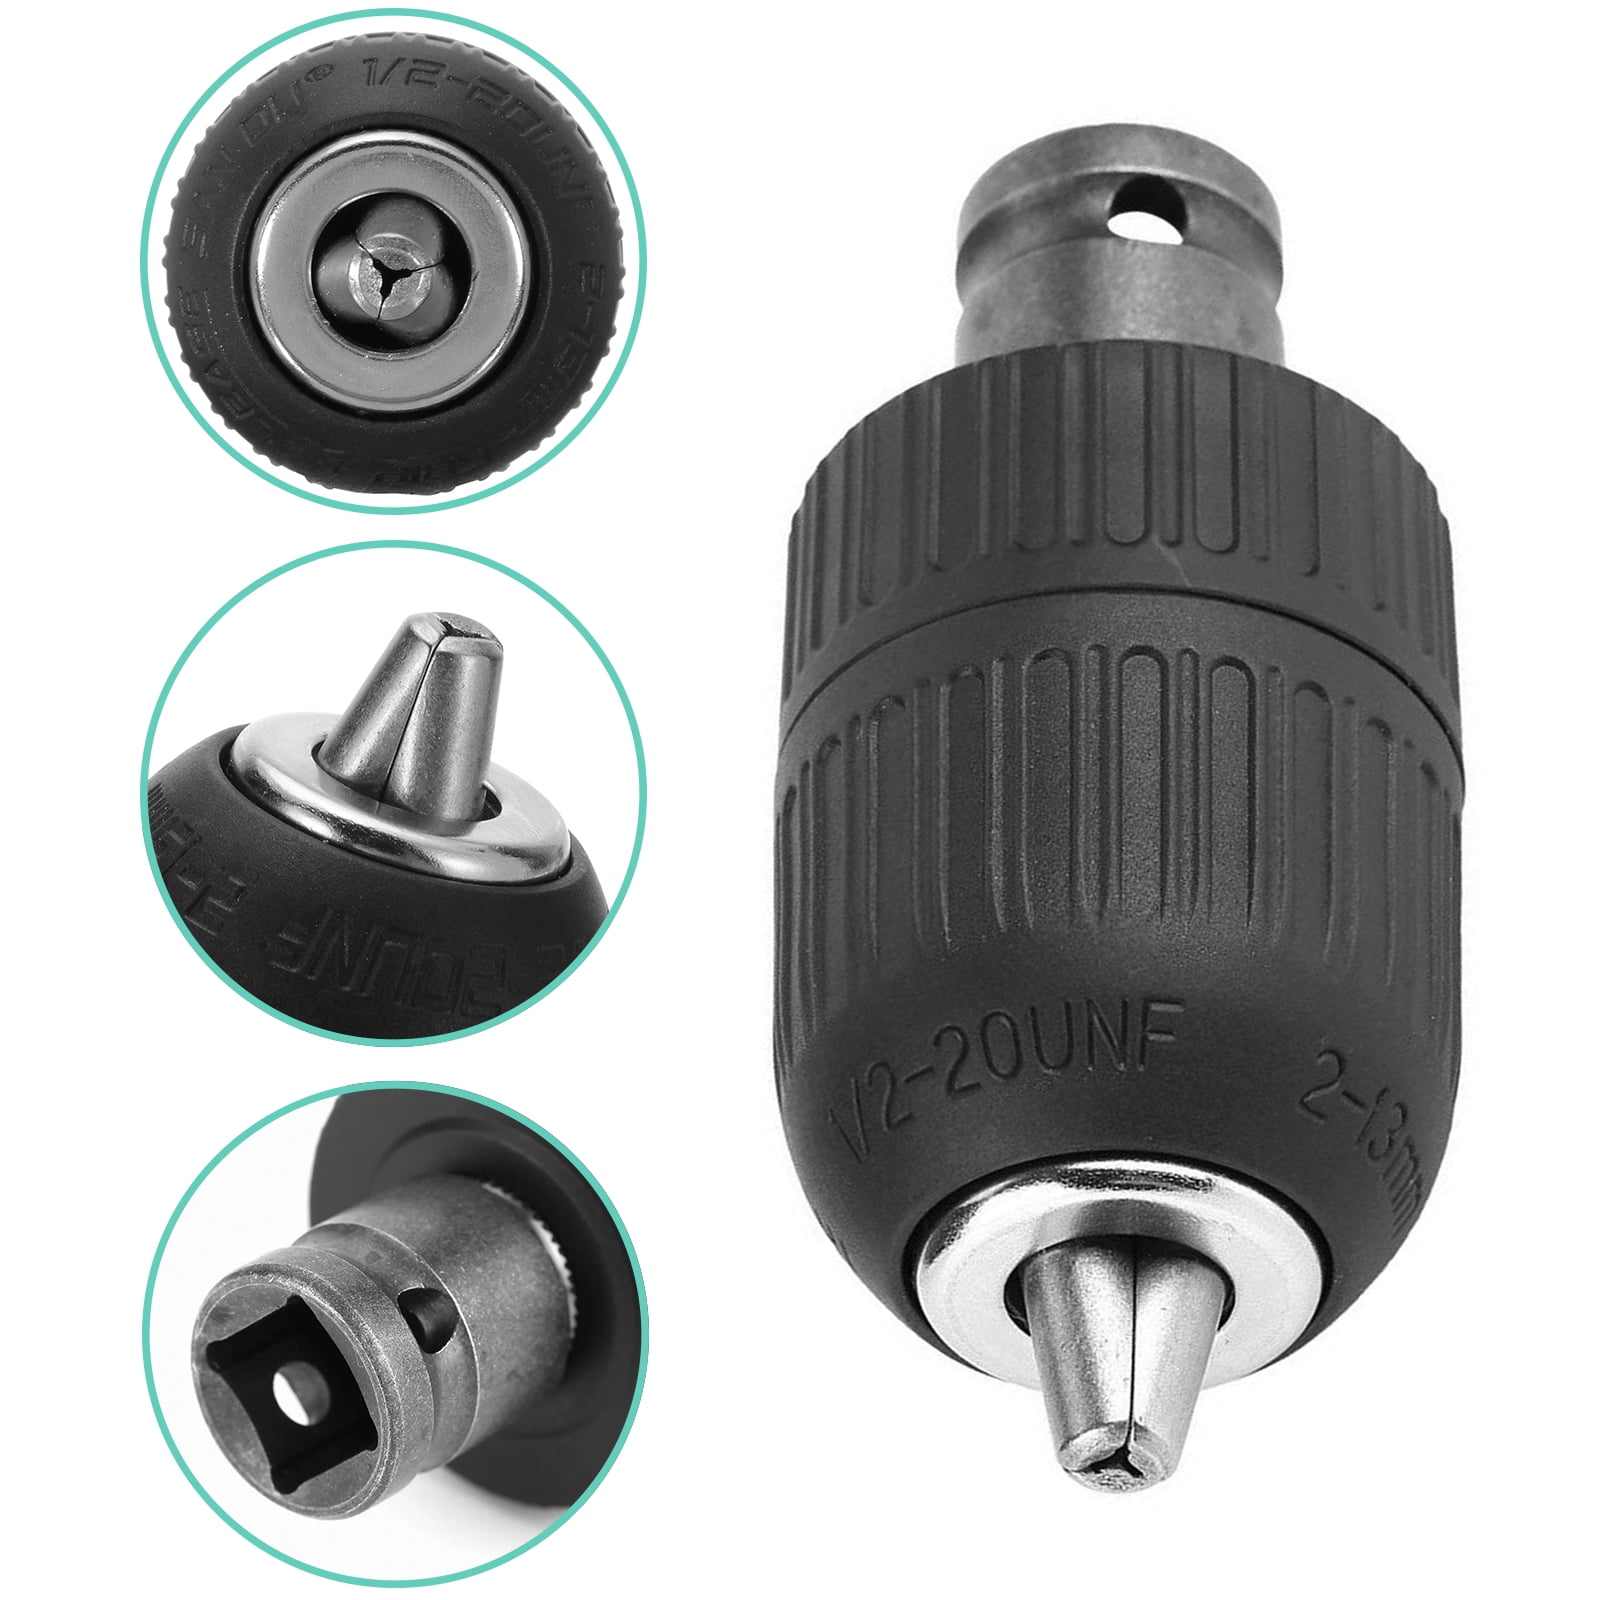 2-13mm Keyless Drill Bit Chuck Adapter With 1/2 Hex Shank For Impact Drive Part 